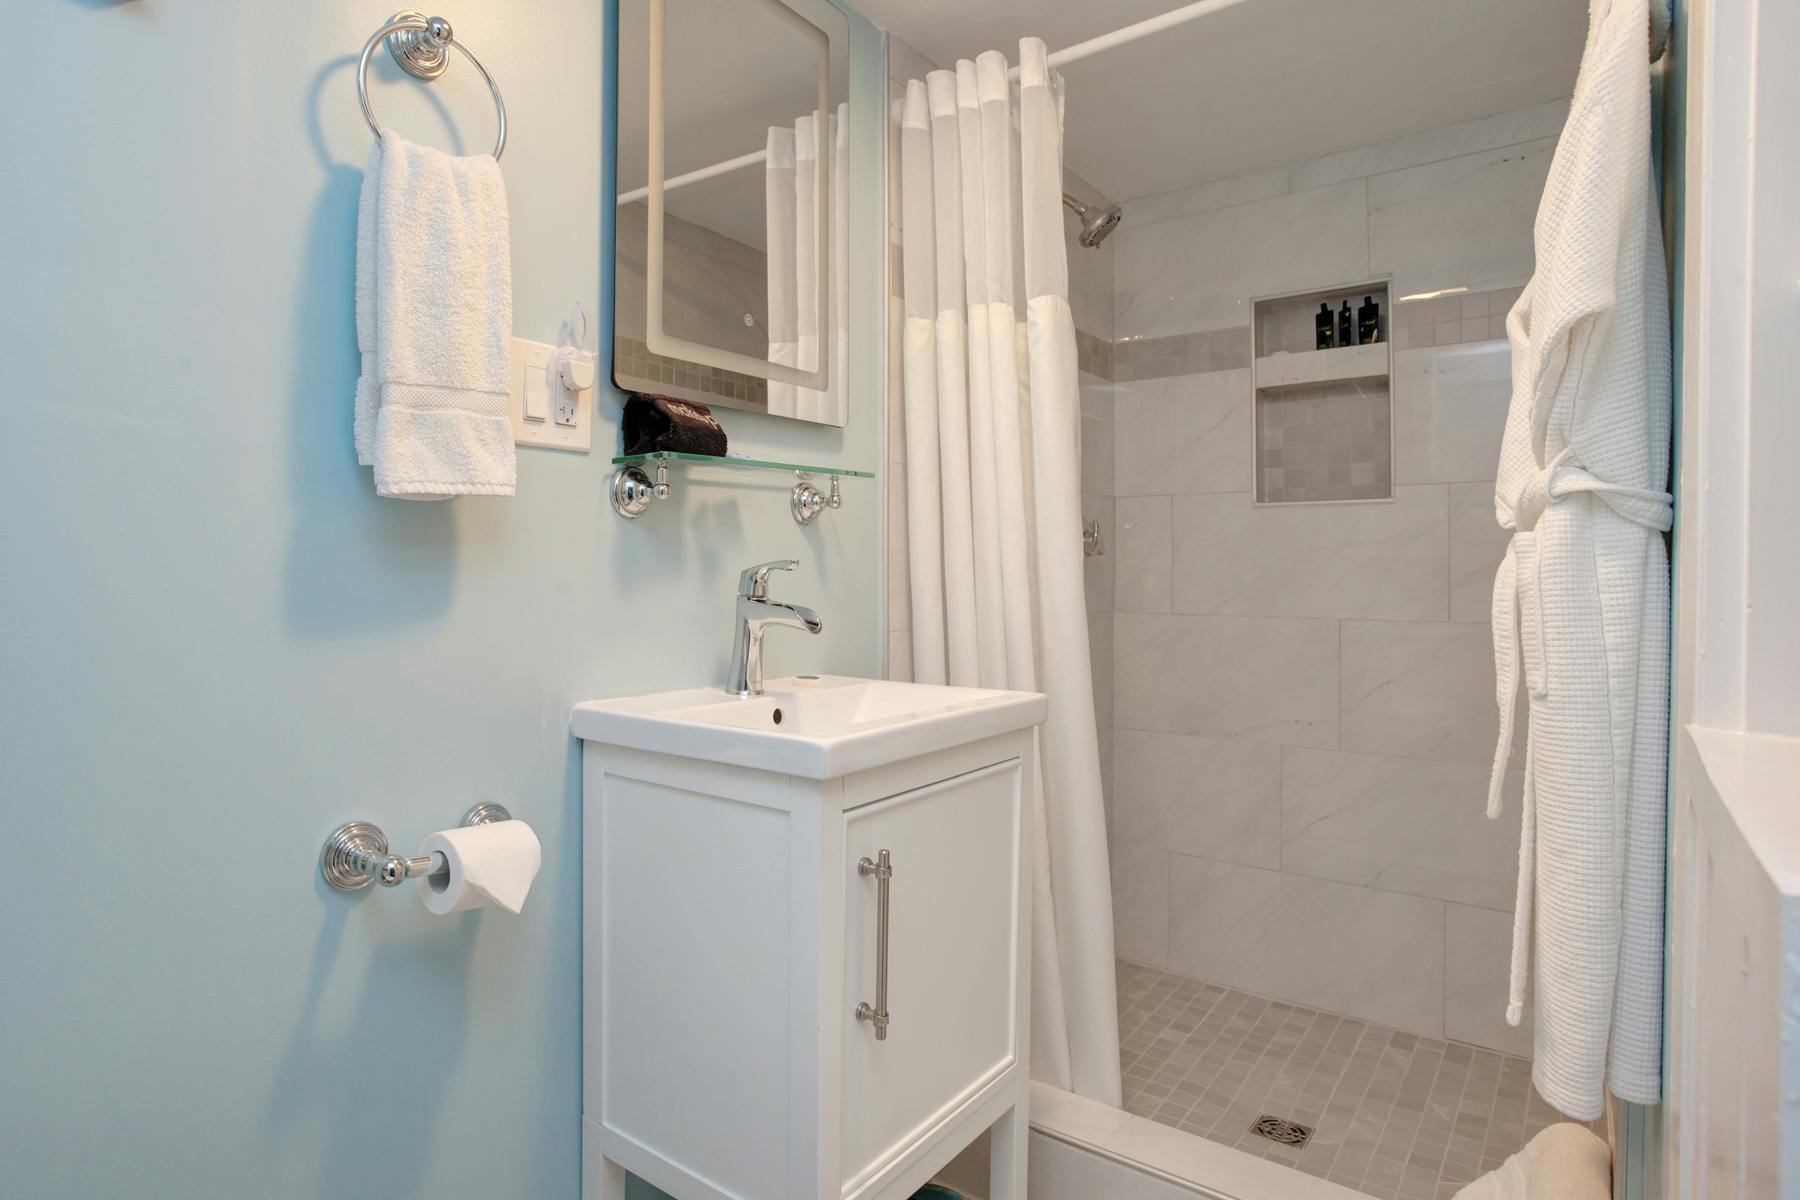 View of bathroom with white vanity and sink, shower, and white plush towels and robe hanging up